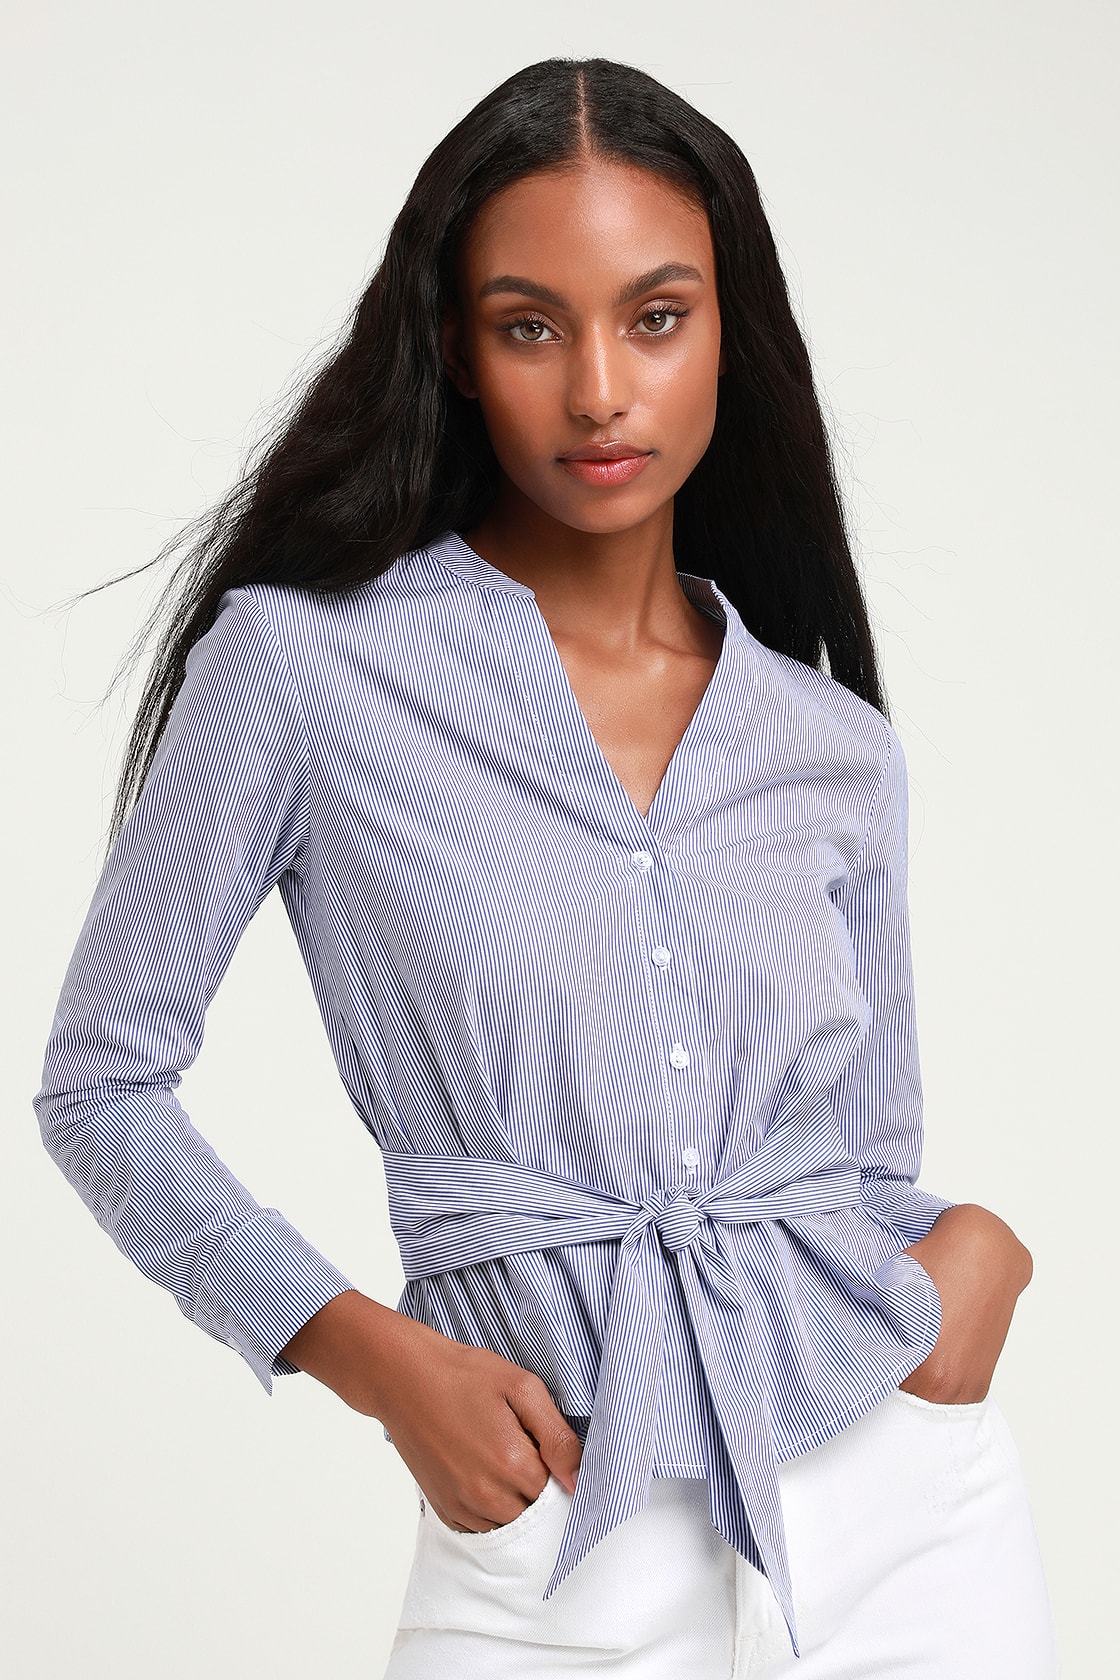 BB Dakota It's Business Top - Blue and White Blouse - Striped Top - Lulus